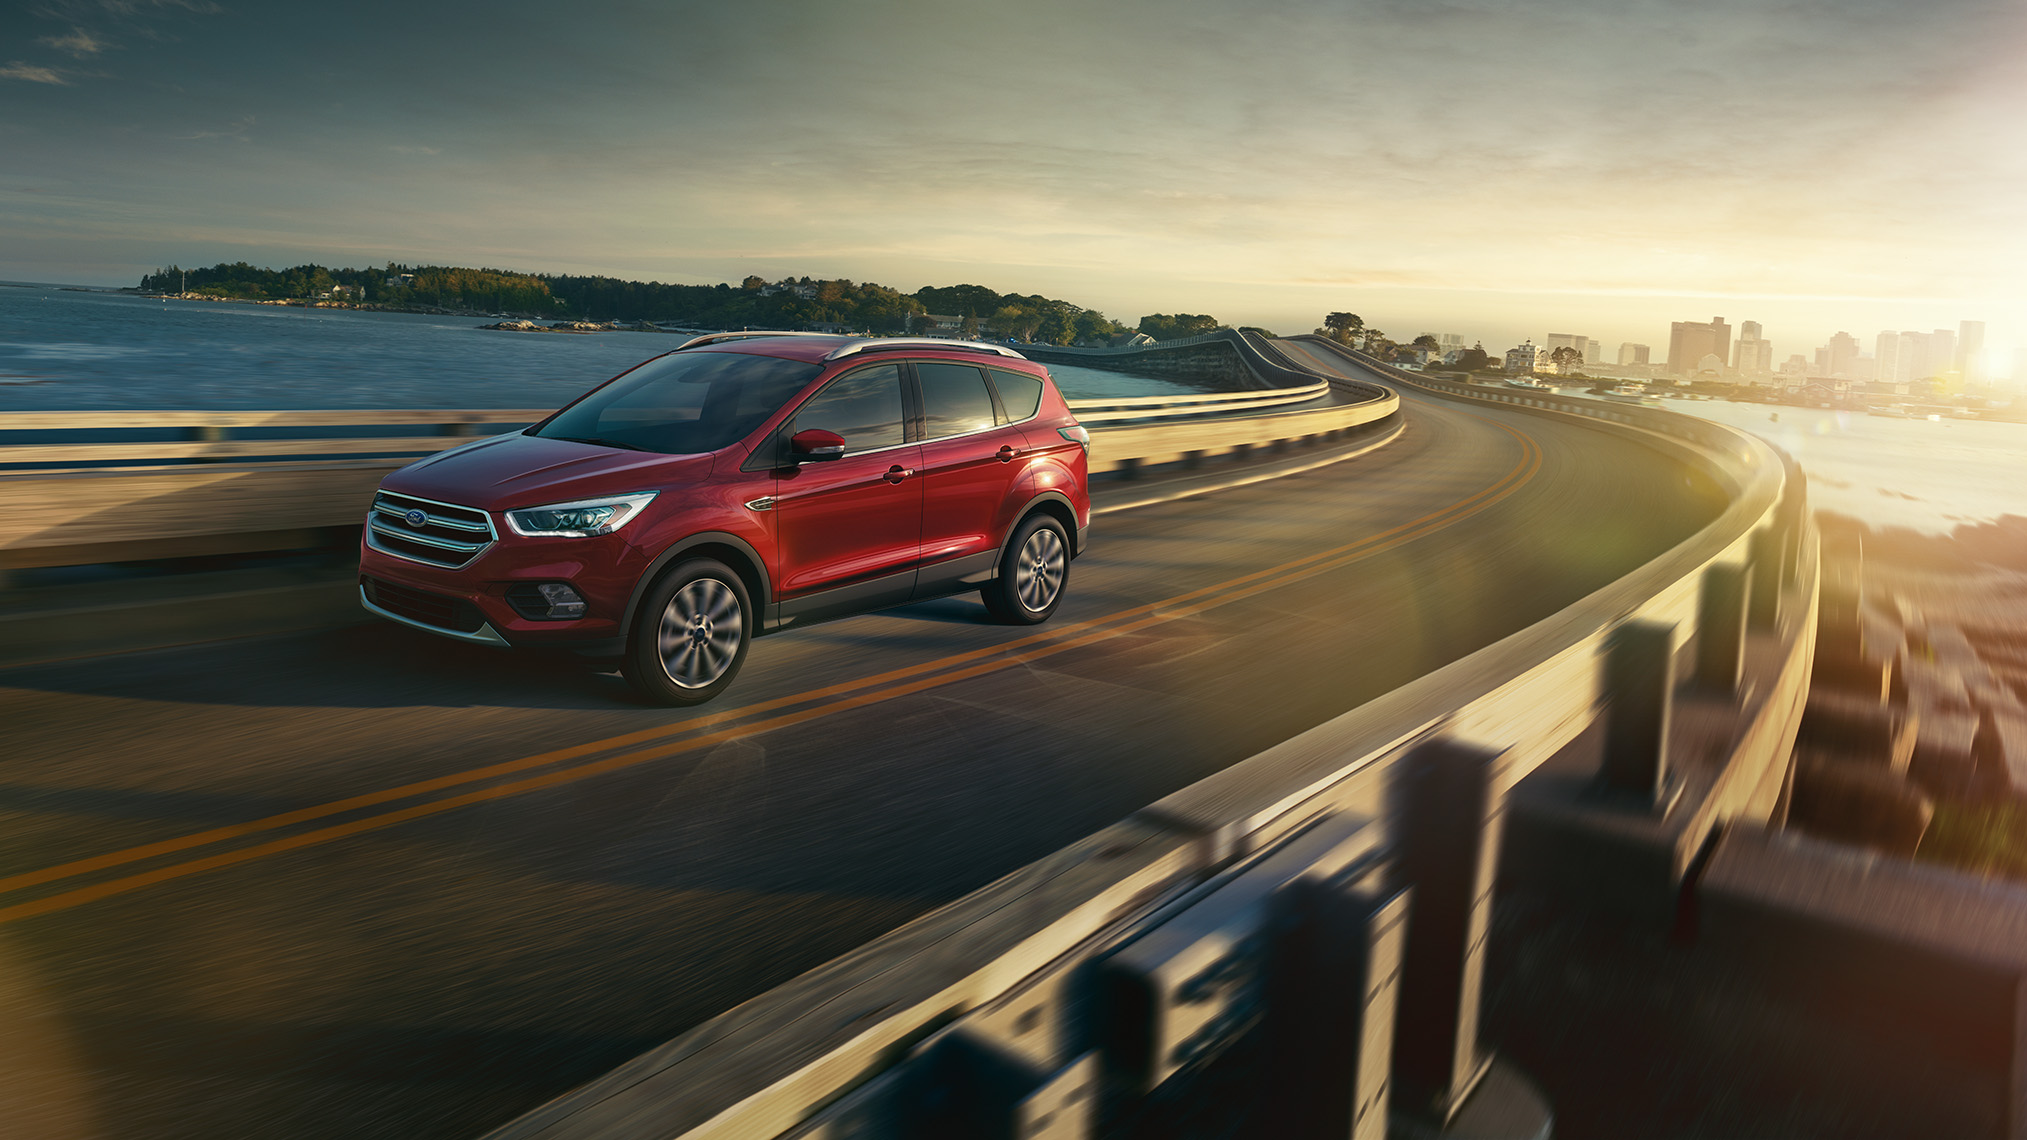 cgi_07_15-107_TEAD_Ford_Escape_Shot13_SaltCodCafe_RED_COMP08_AND_FINAL_ART_1140pxl